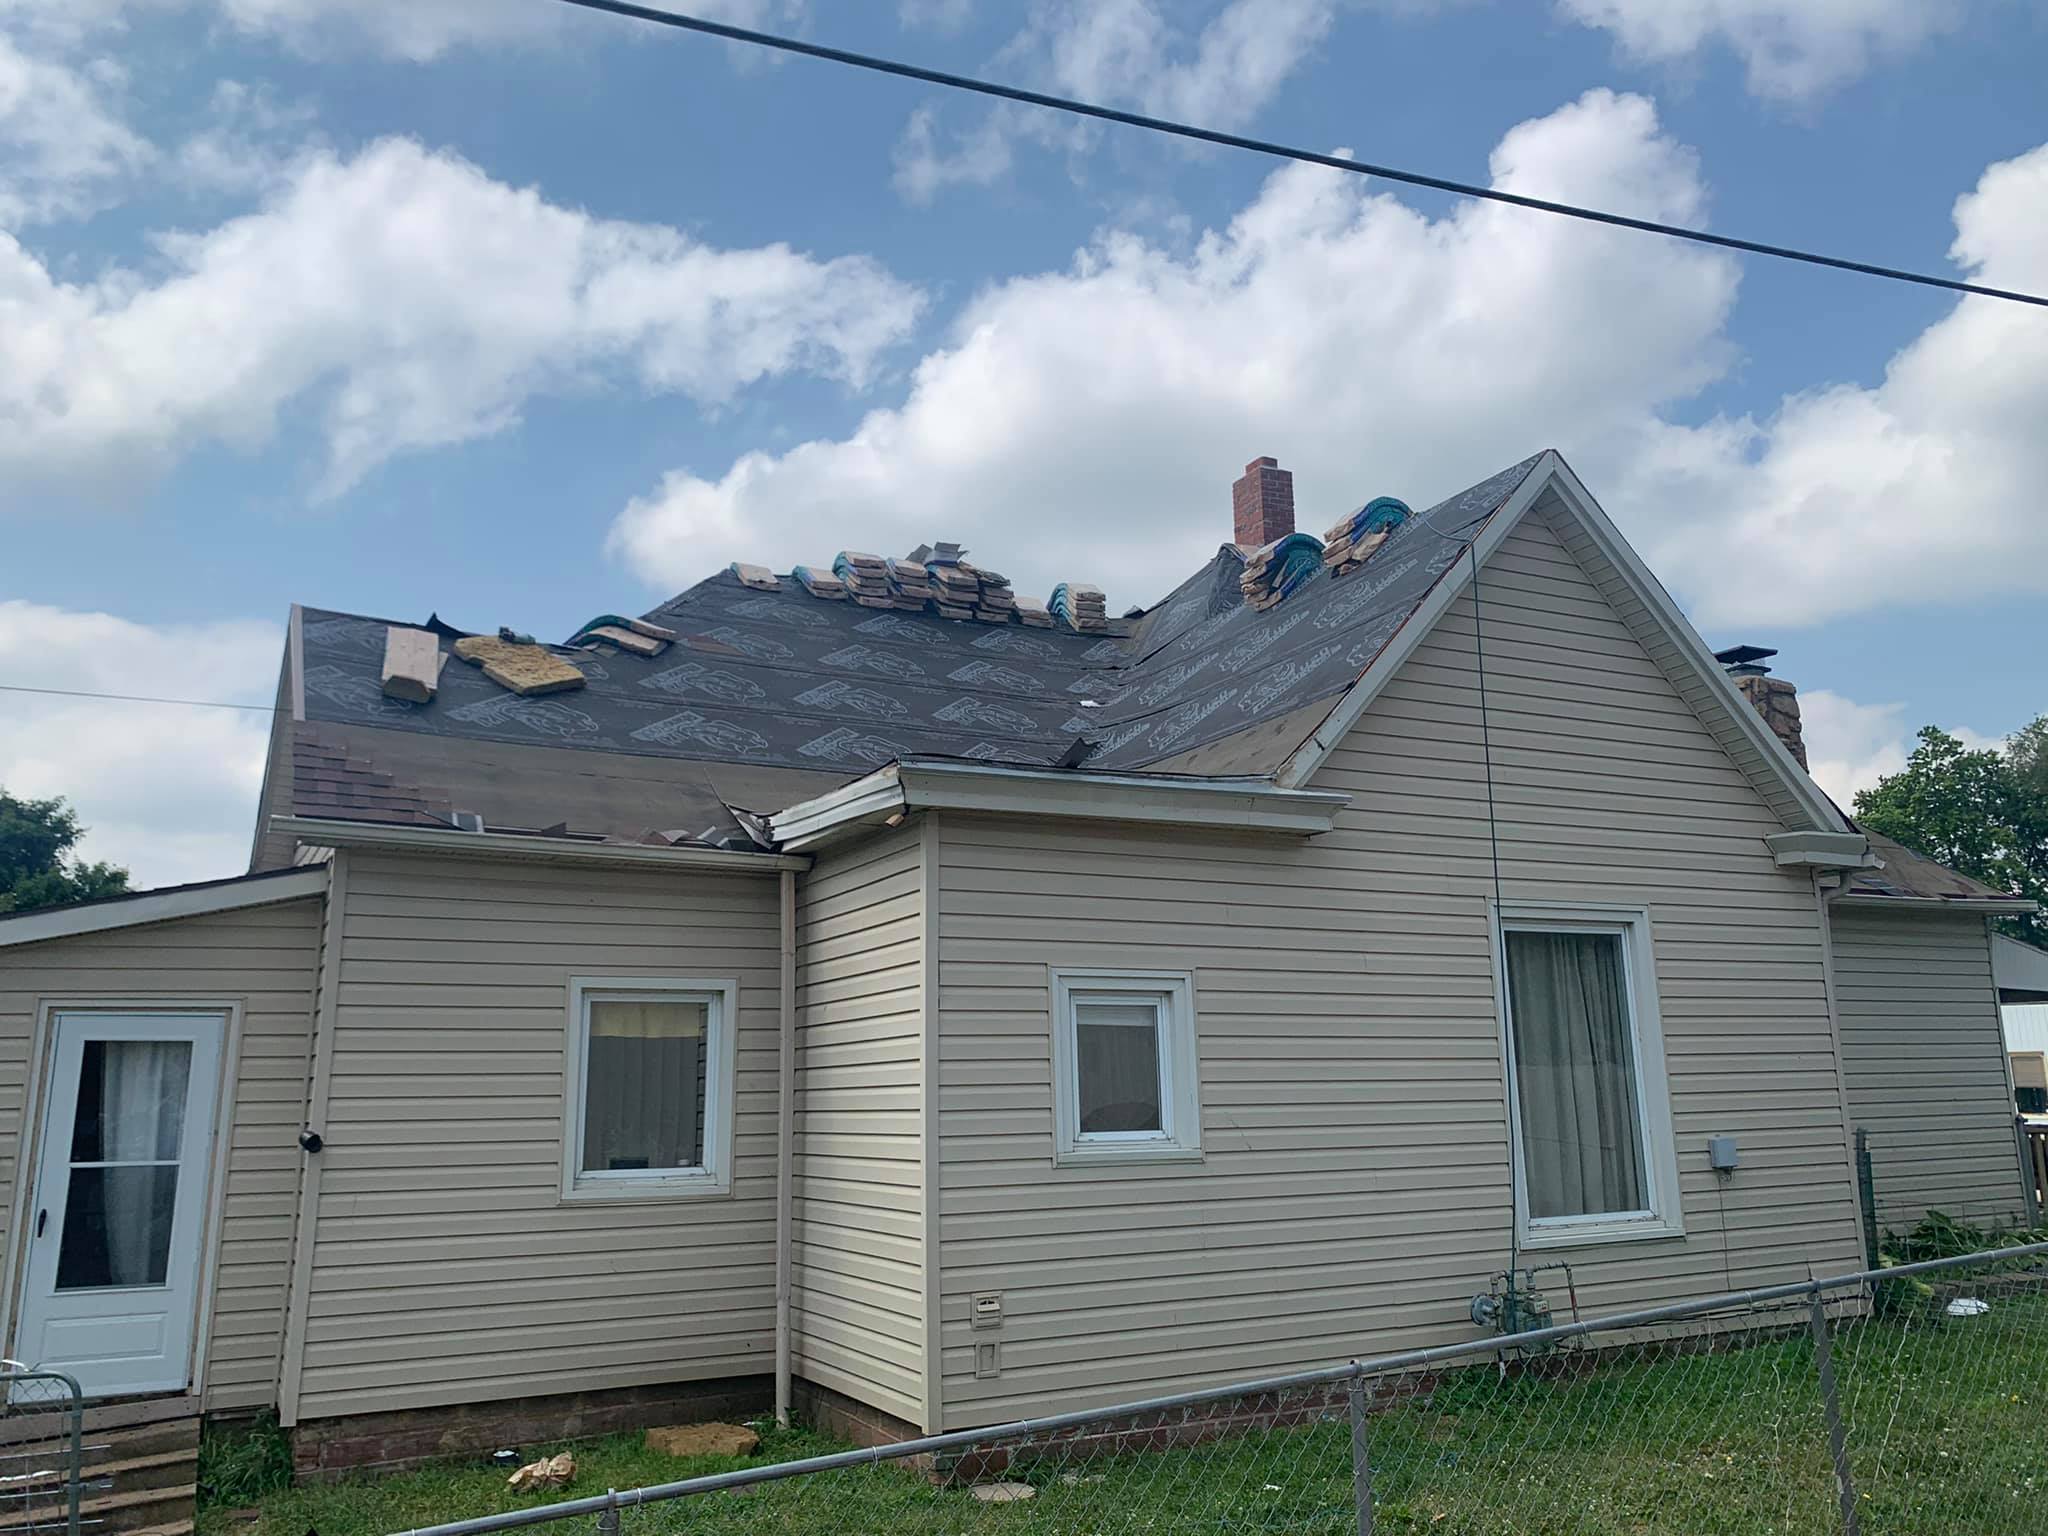 Roofing Companies Cameron Missouri - Finding The Best Company